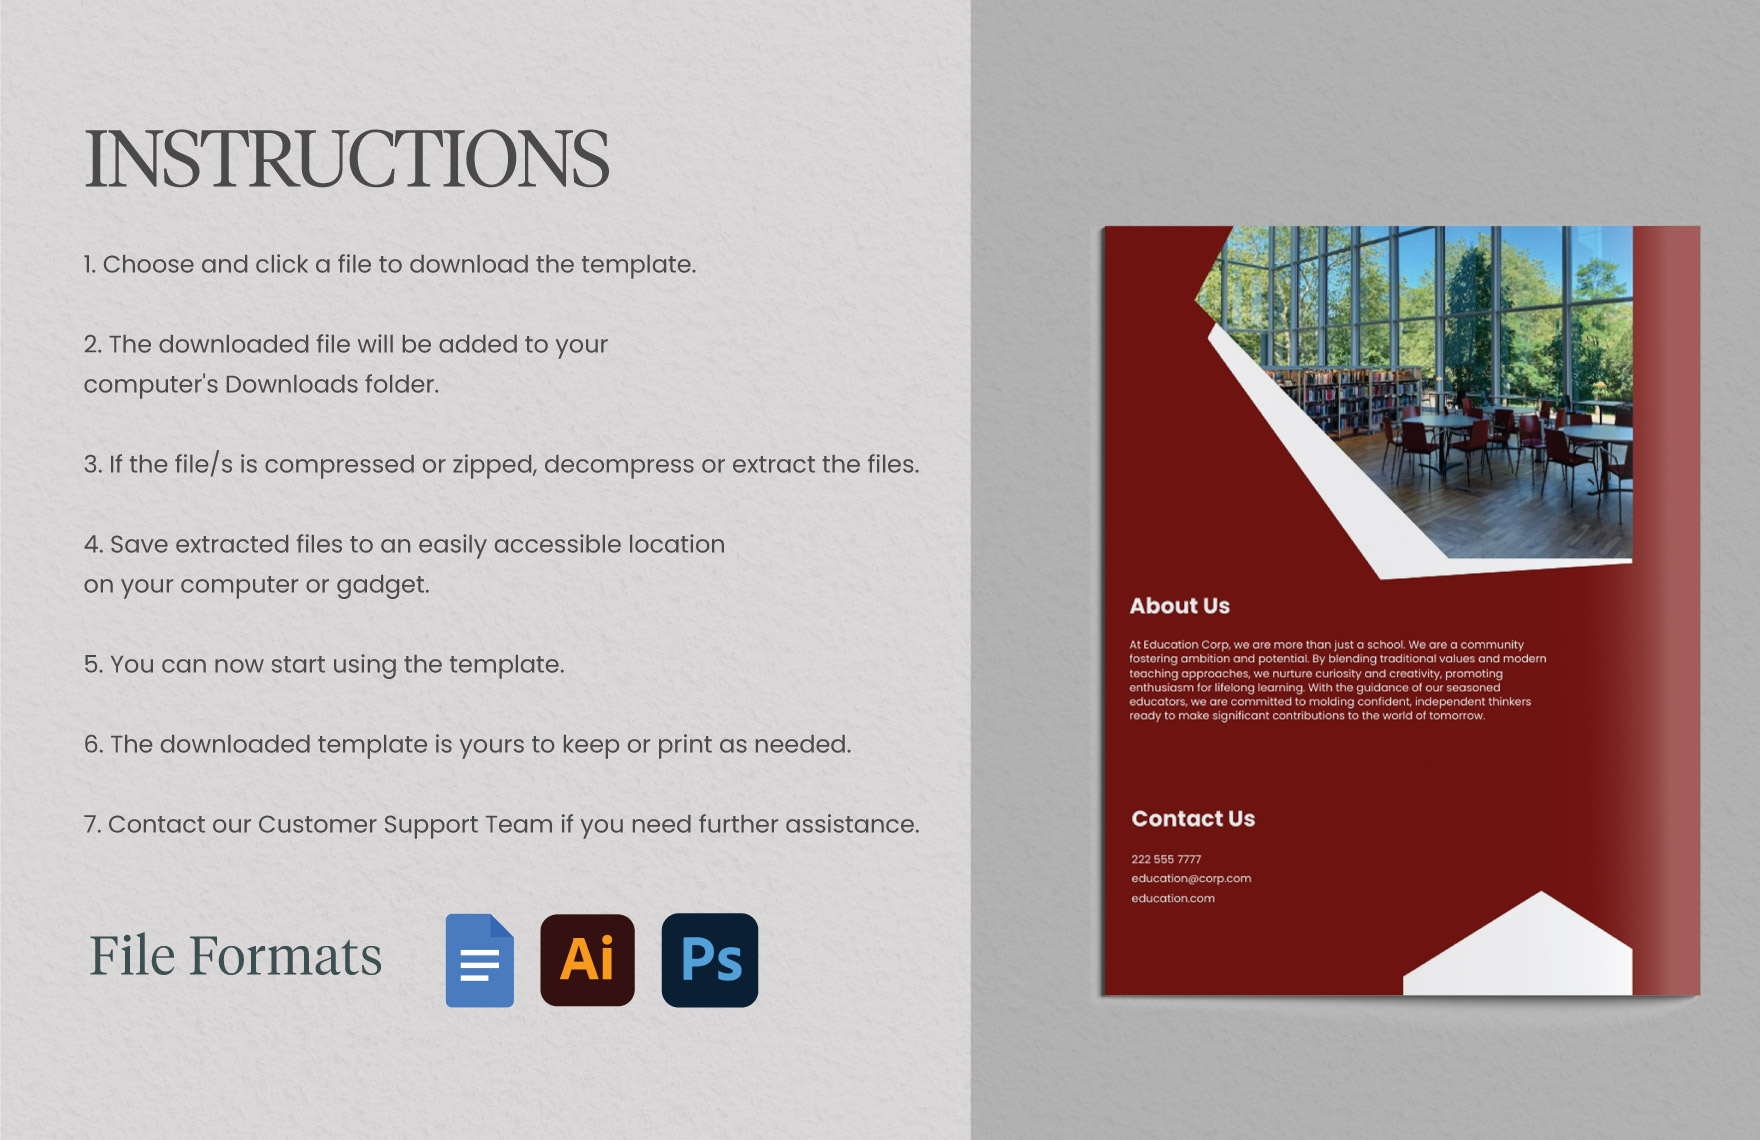 Admission Guidelines Brochure Template